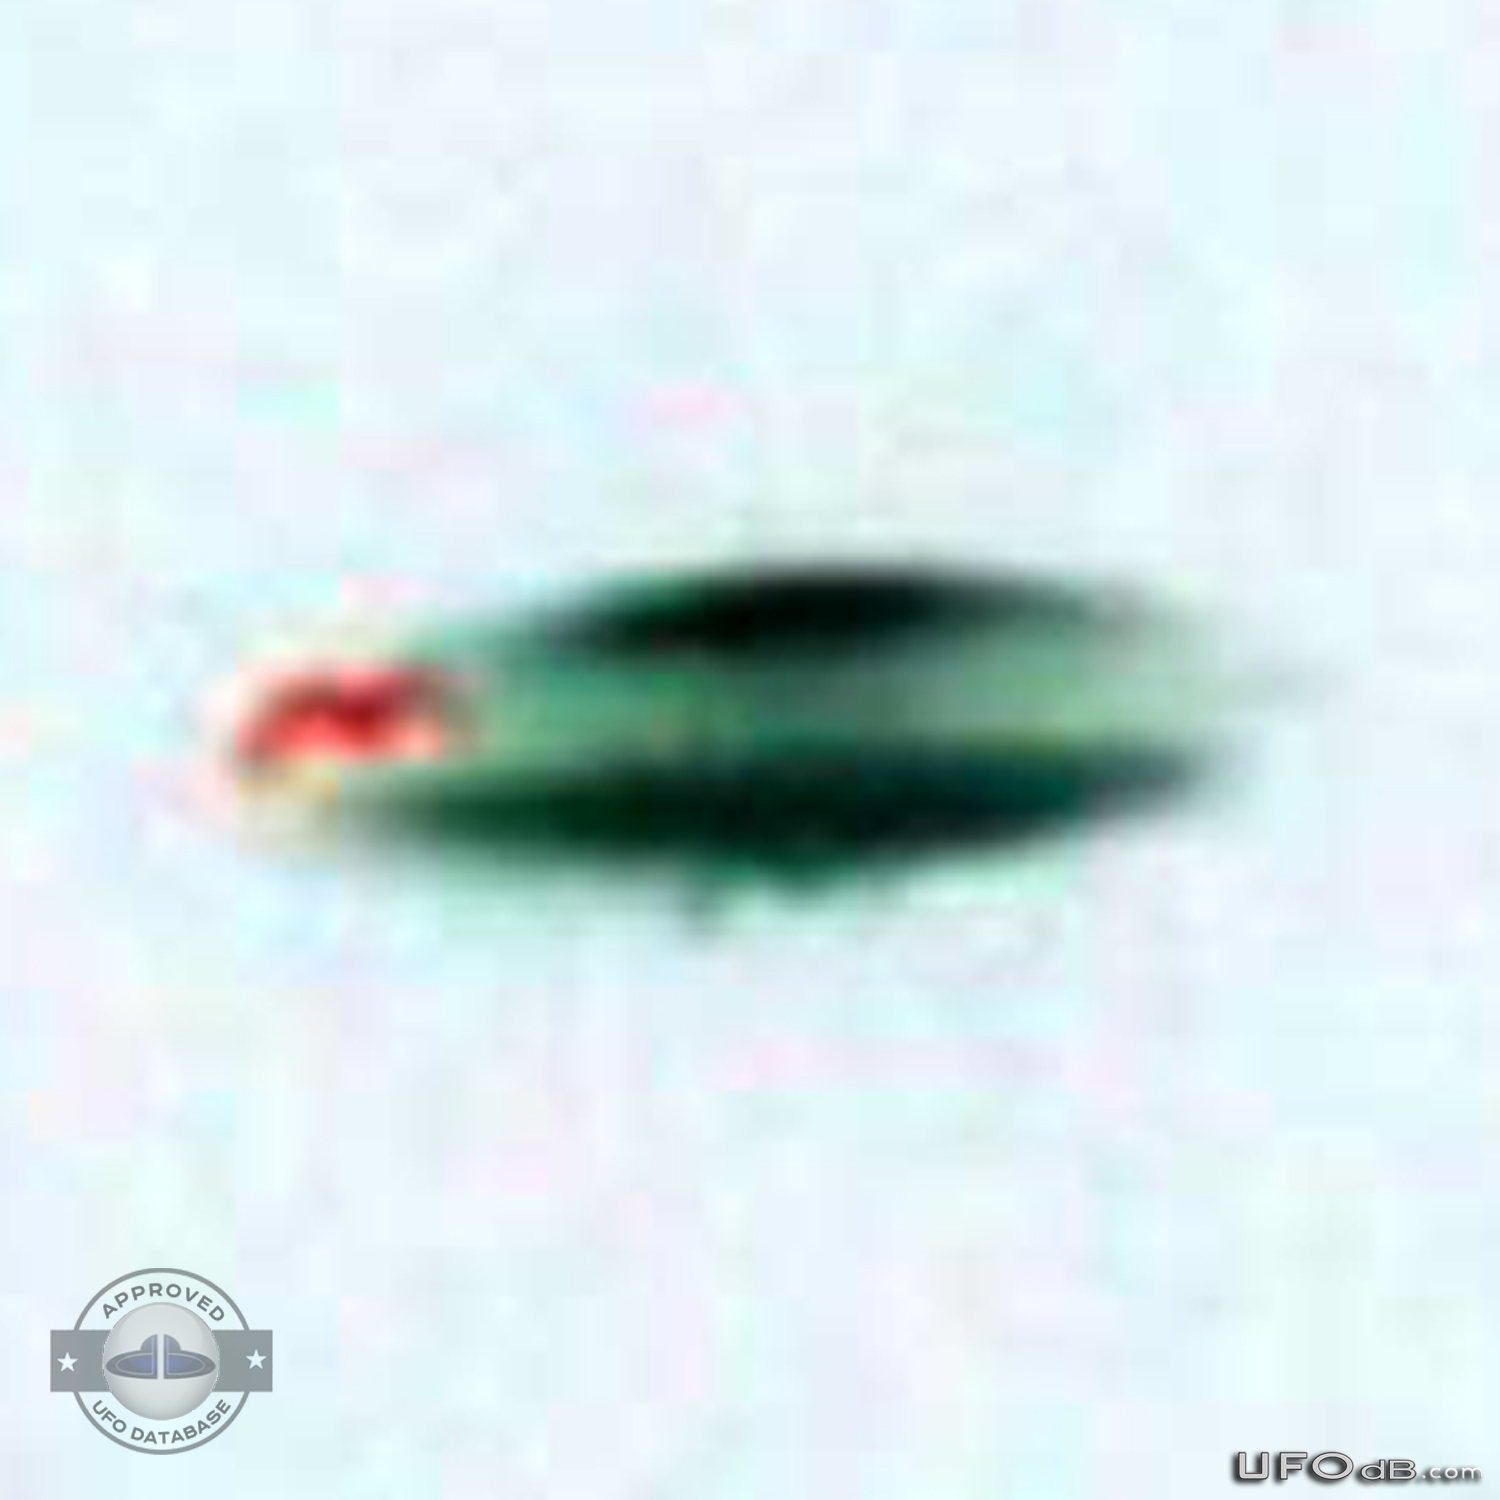 Clear Picture of UFO taken in the night Los Angeles, California | 2012 UFO Picture #397-5